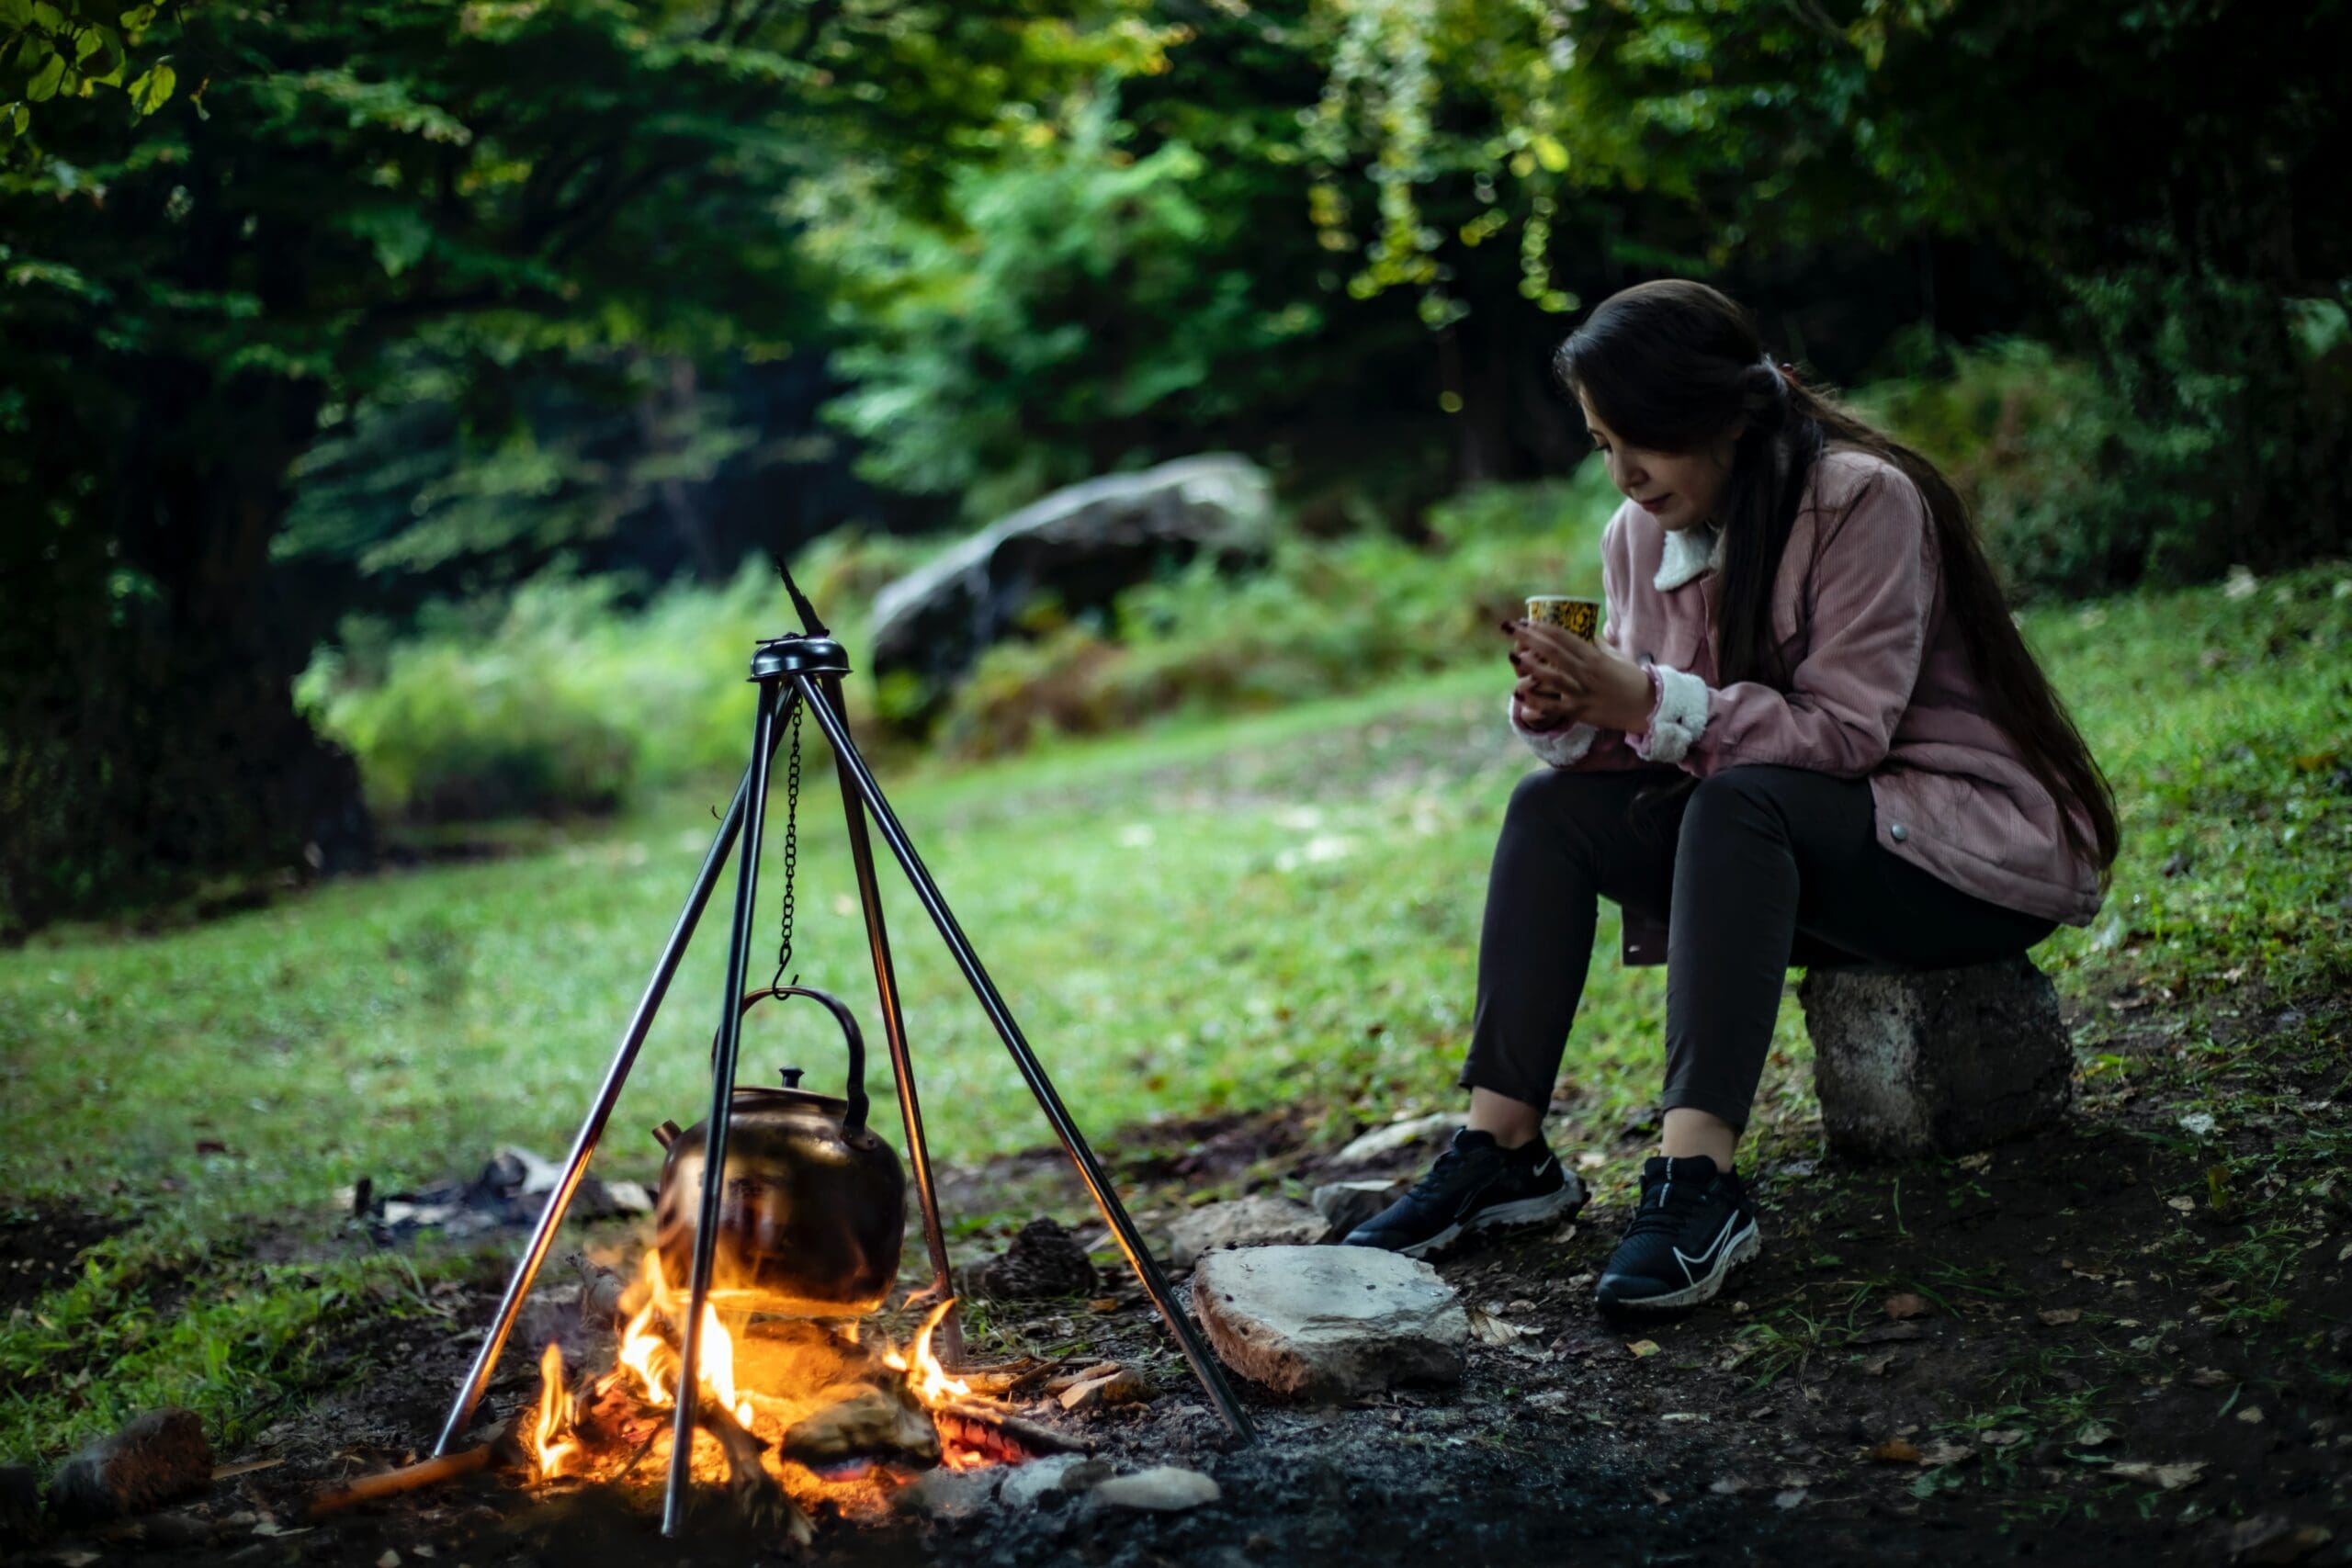 A woman dressed for a hike sits in the middle of a clearing. She is nursing a mug of tea as a kettle warms over the campfire.